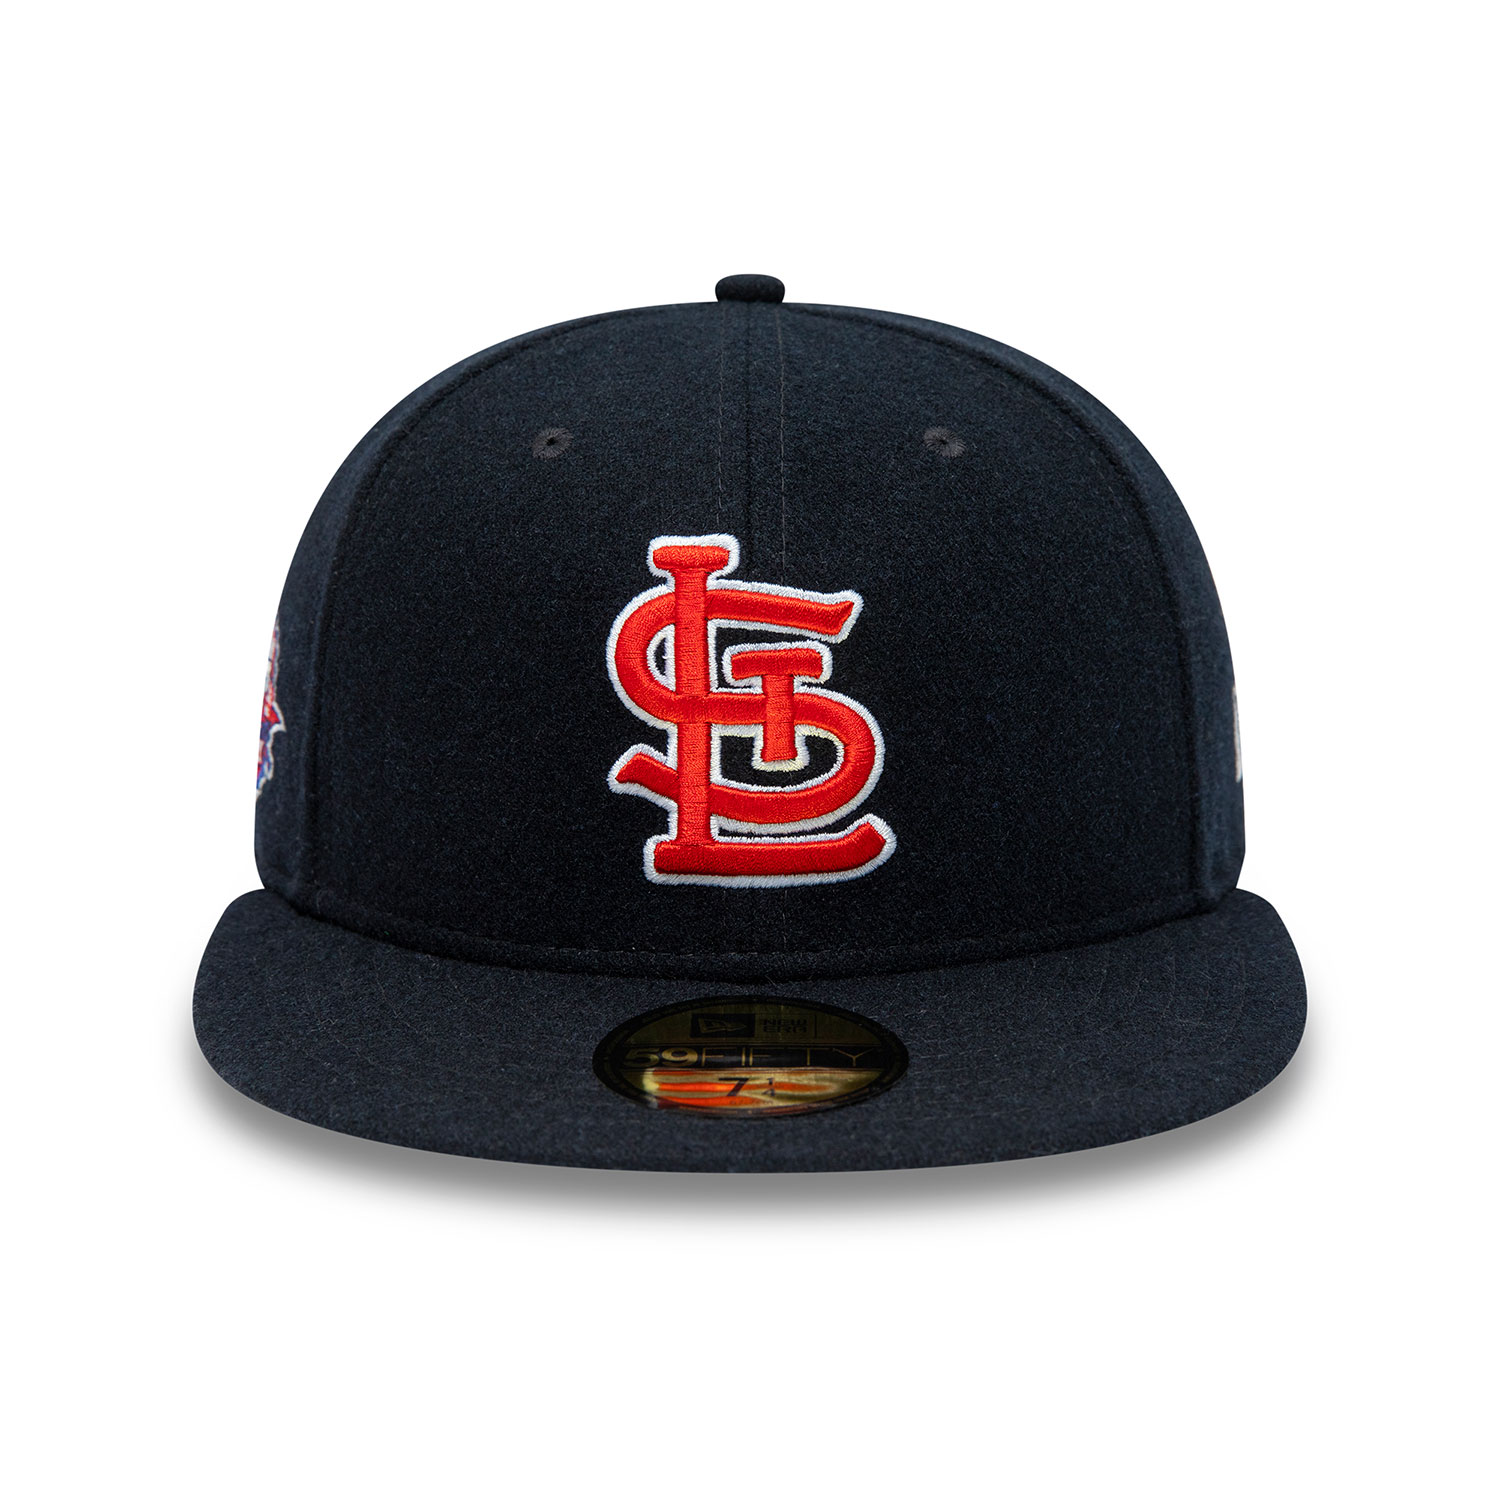 St. Louis Cardinals Anniversary Navy 59FIFTY Fitted Cap